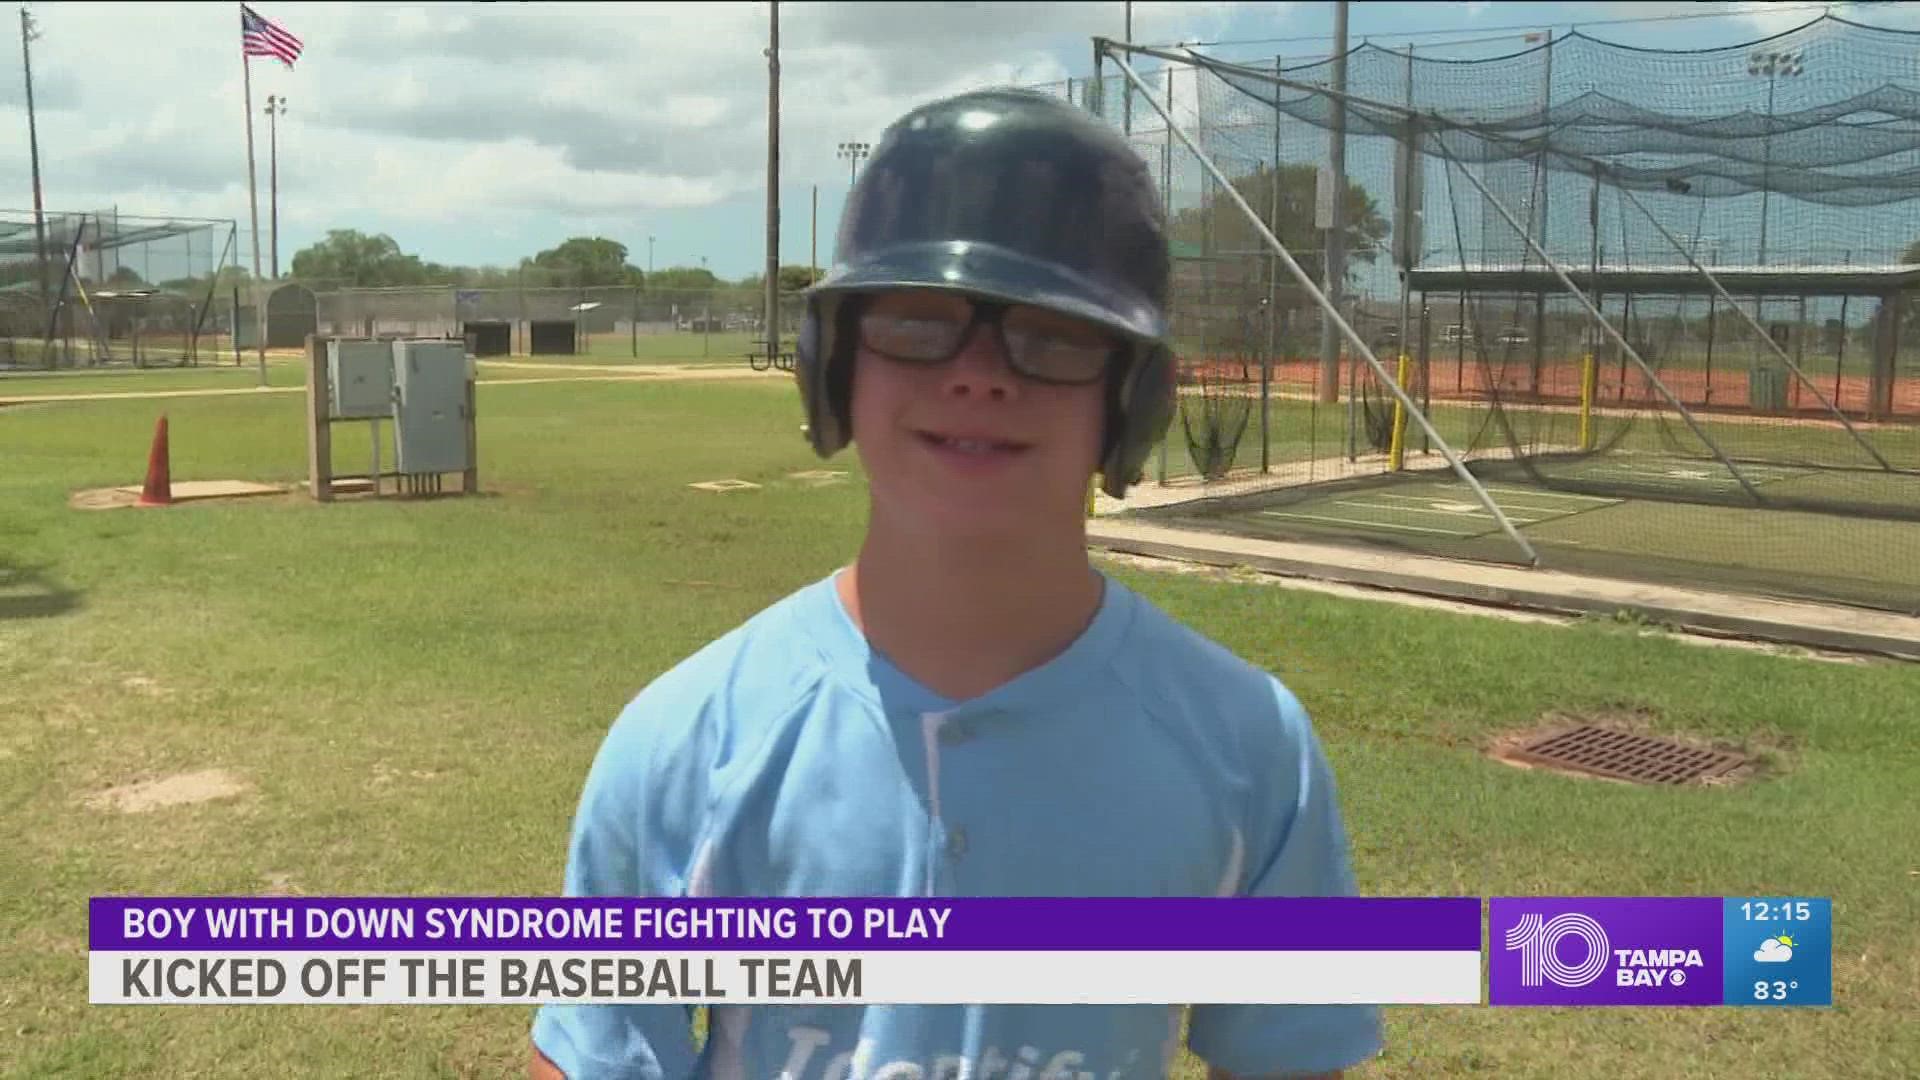 The Lakewood Ranch Little League president said Cameron was told he can no longer take at bats in that division because it poses a safety risk to 7 to 10-year-olds.